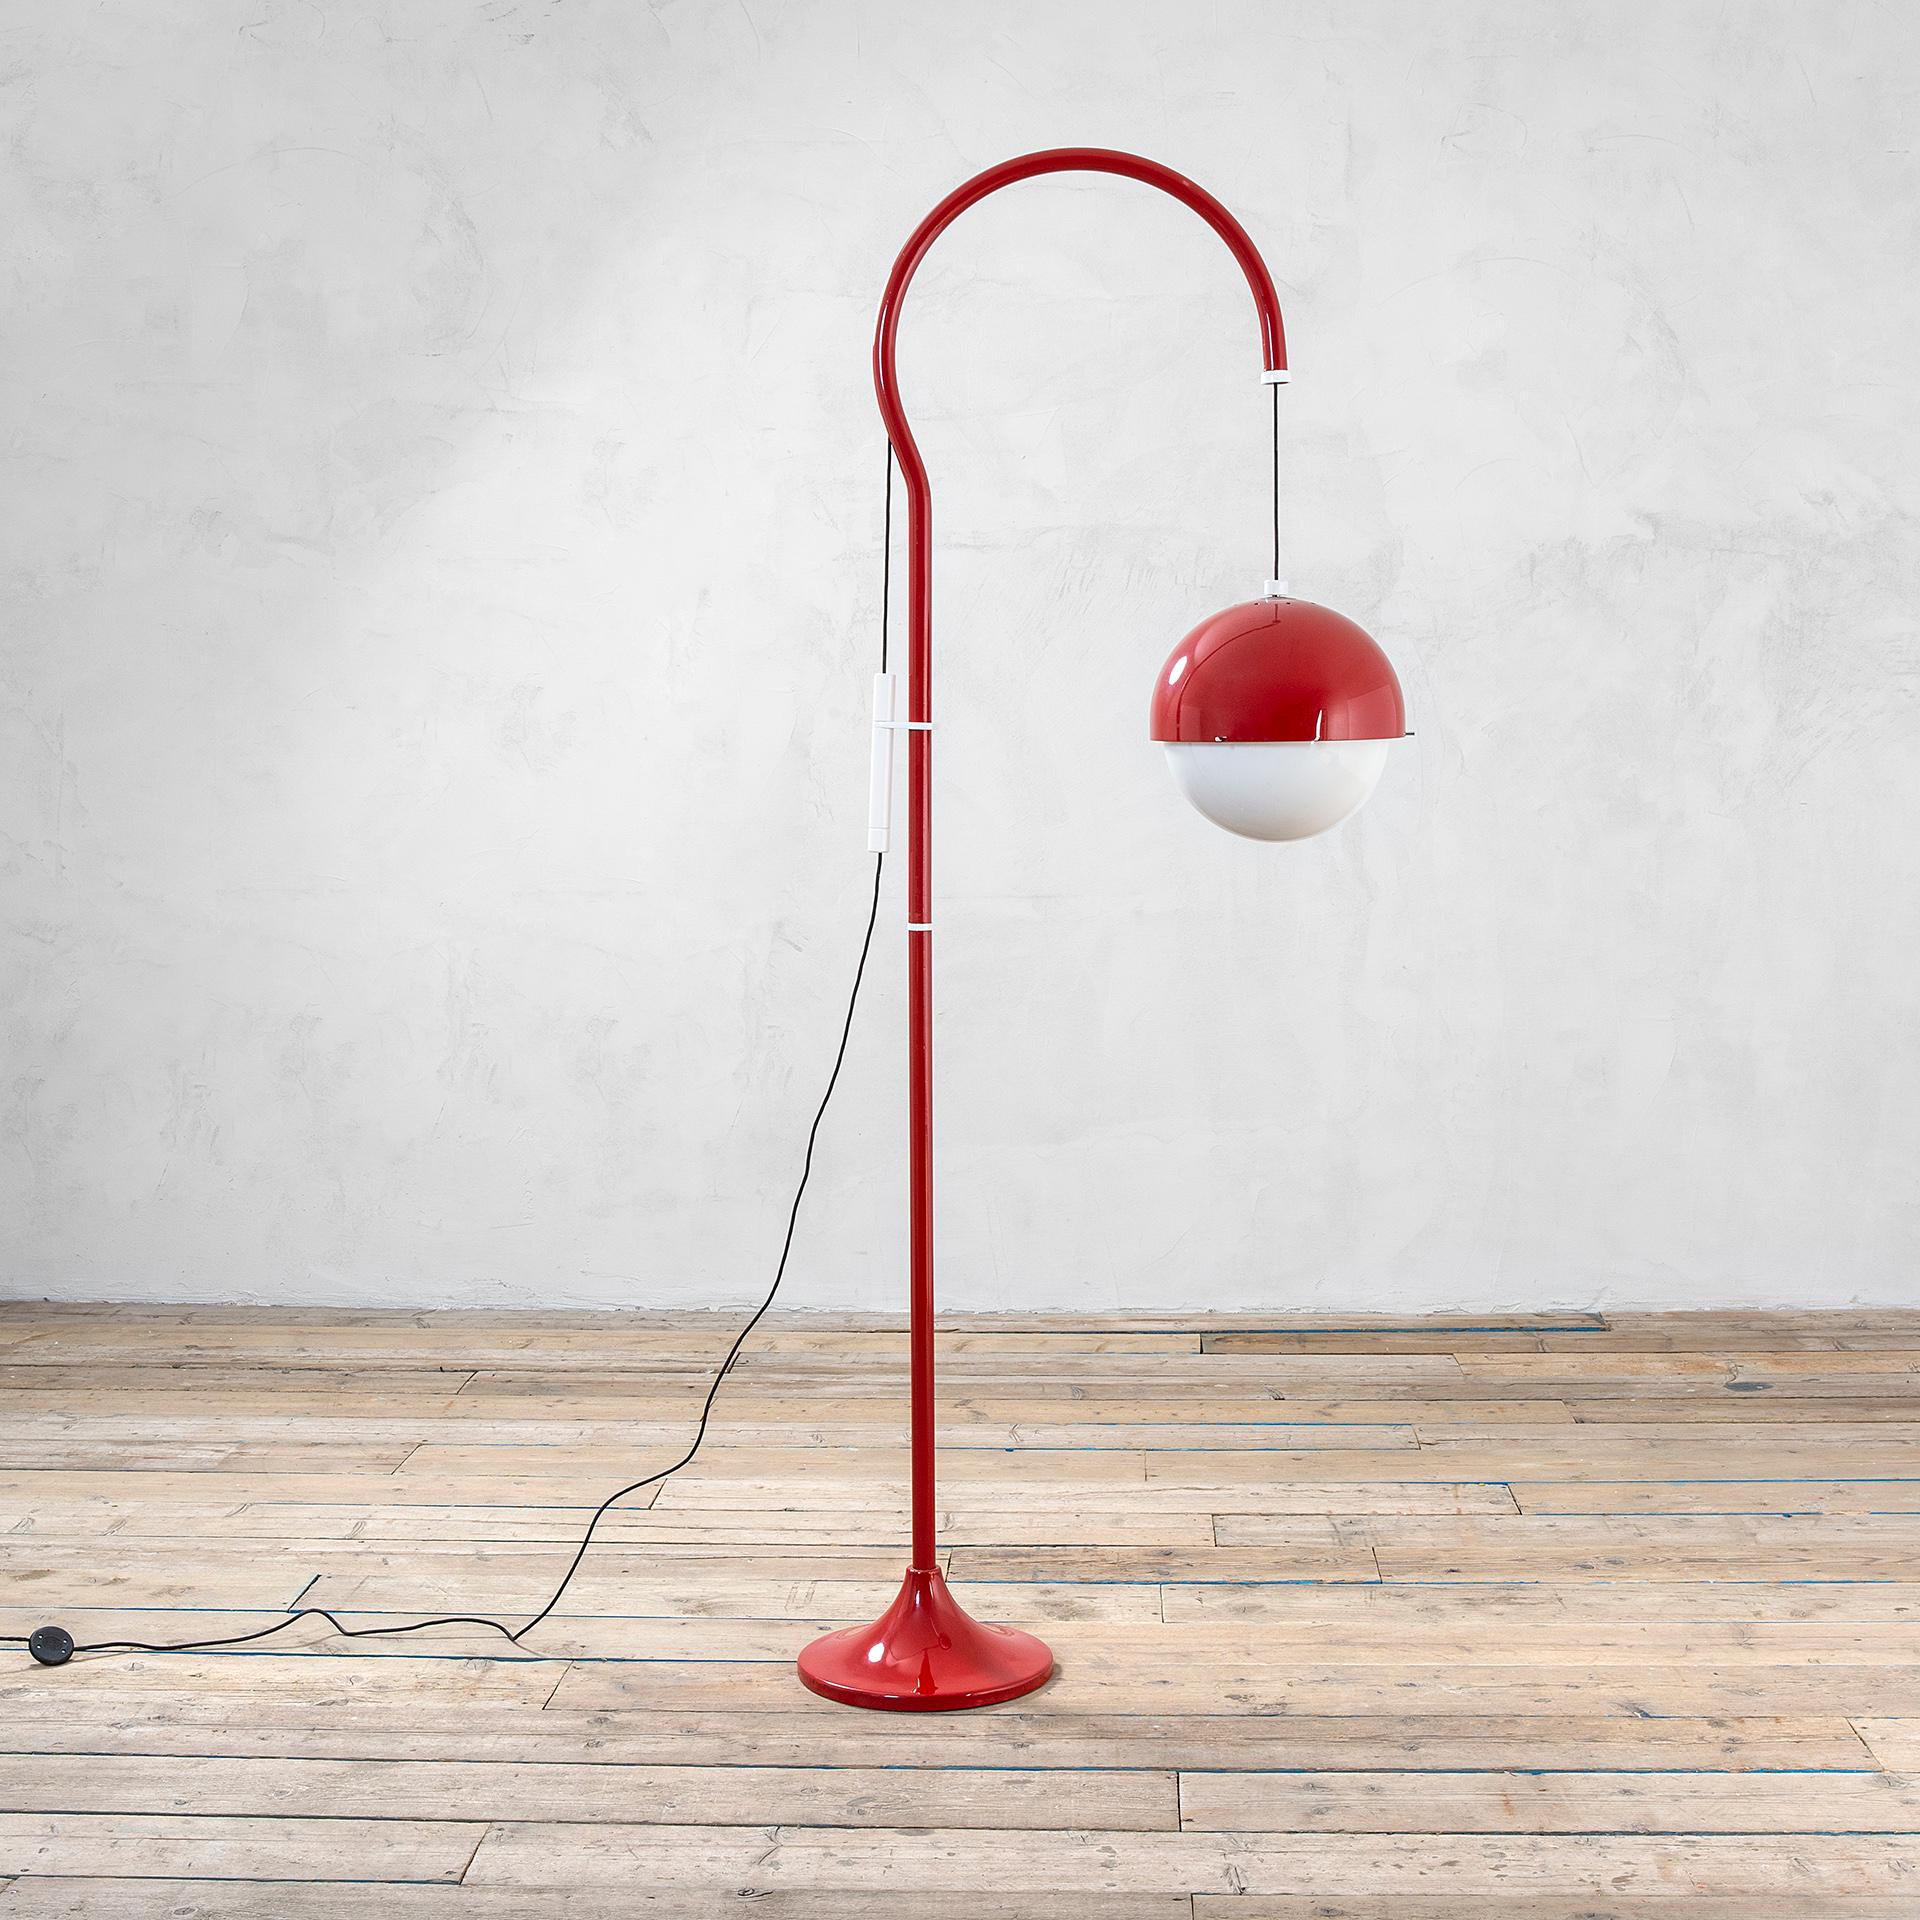 Floor lamp designed by Luigi Bandini Buti in '70s for the Manufacturer Kartell. The floor lamp model 4055 has a structure in red lacquered metal and the round diffuser is in perspex. A smart system along the structure allows to move the diffuser up